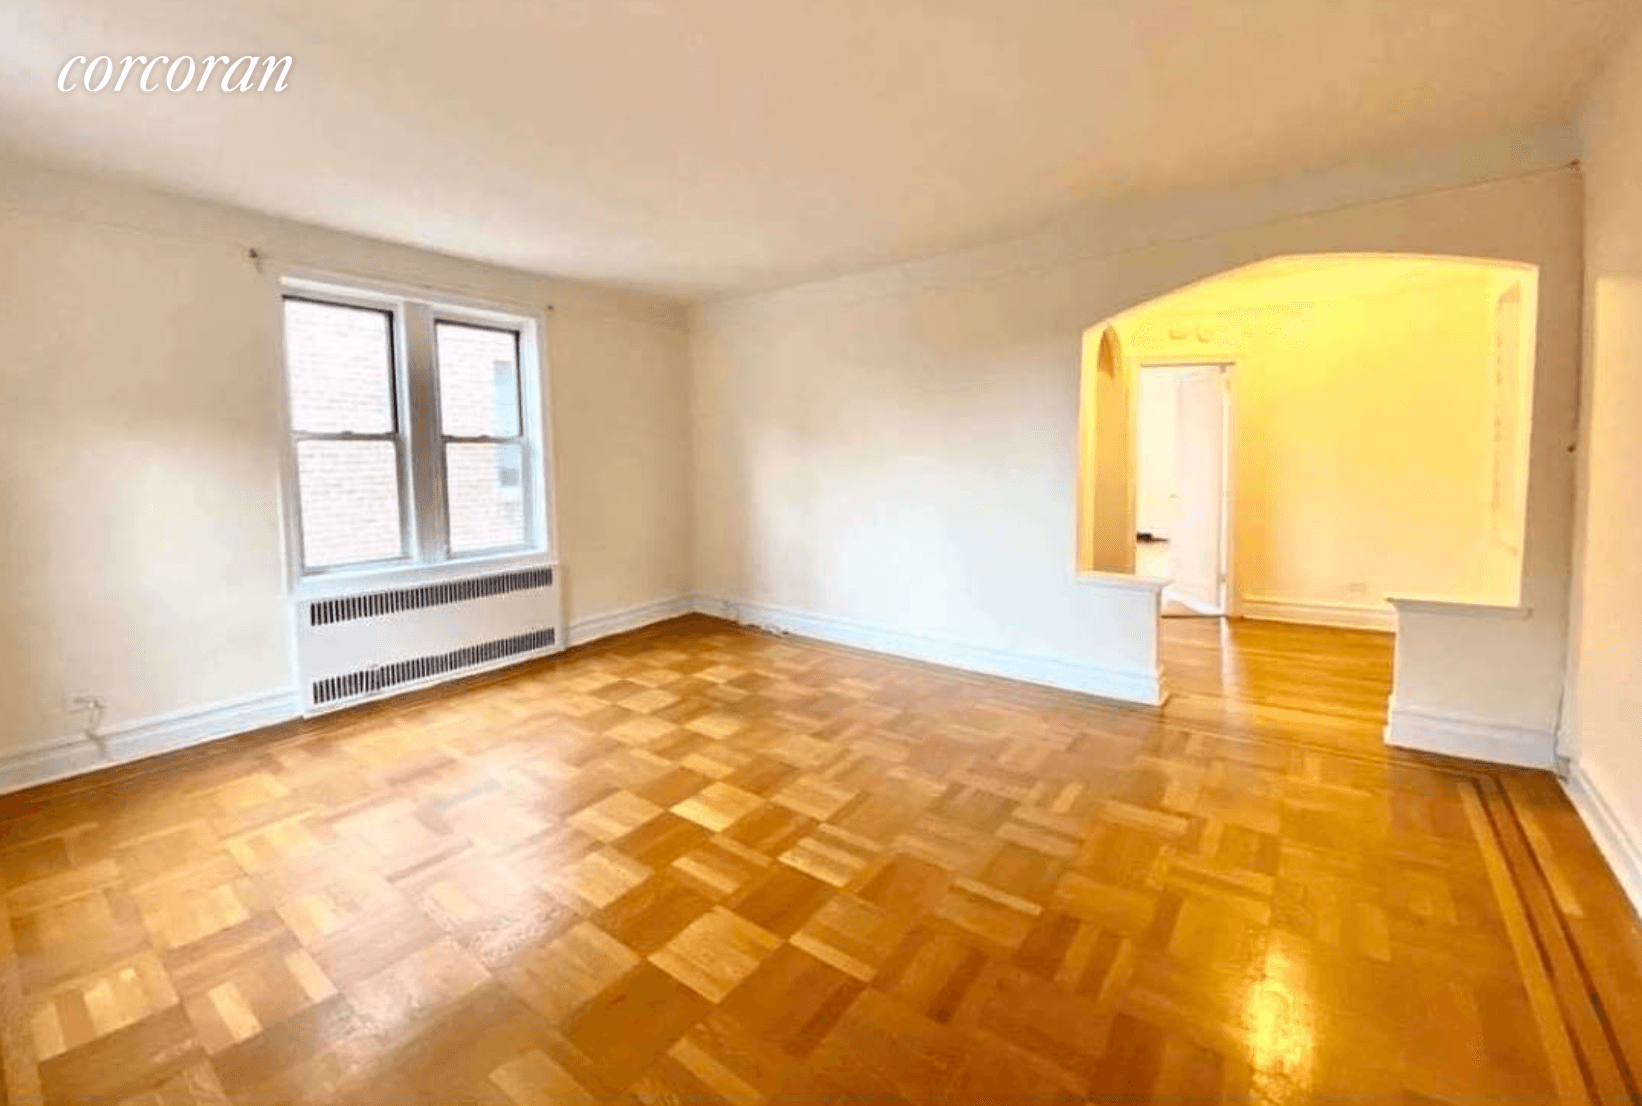 One of the very best buildings in Windsor Terrace, right by beautiful Prospect Park and Subway A Huge RENOVATED 1000 sq ft 1 bed !